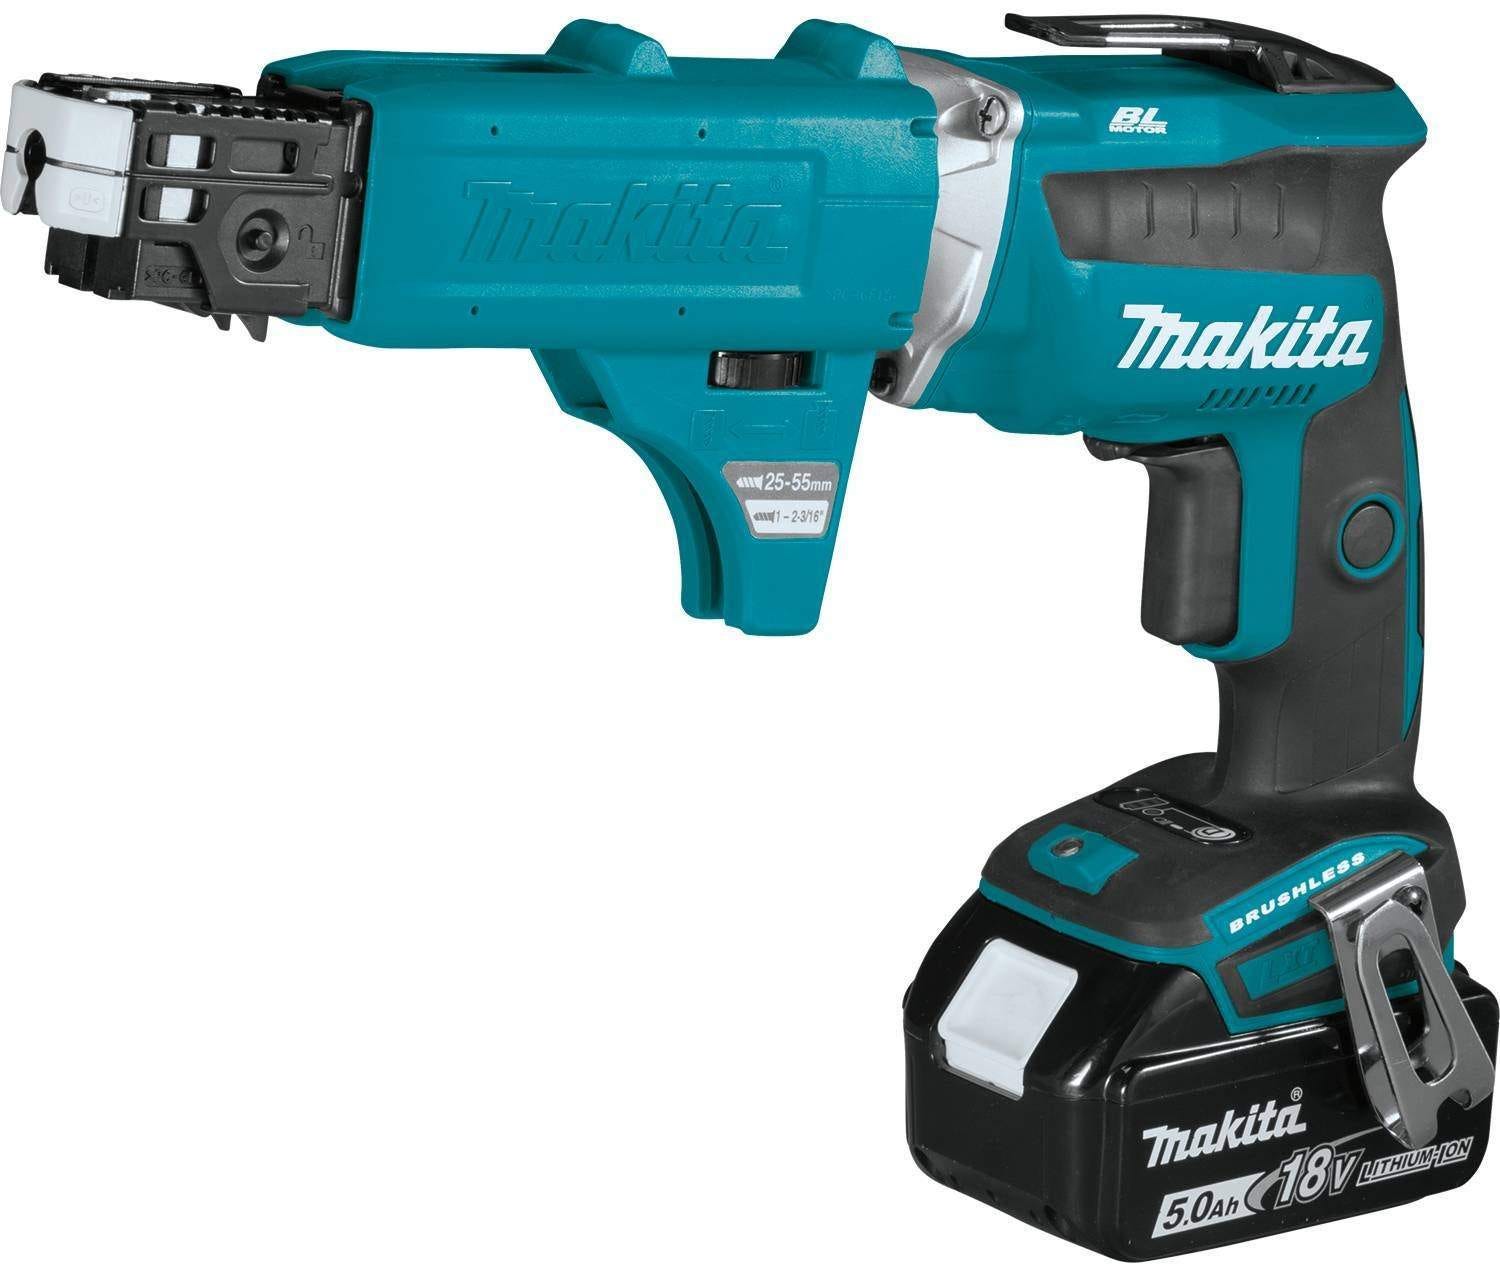 Makita XT255TX2 18V LXT 2-Tool Combo 5.0Ah Kit with Collated Auto Feed  Screwdriver Magazine